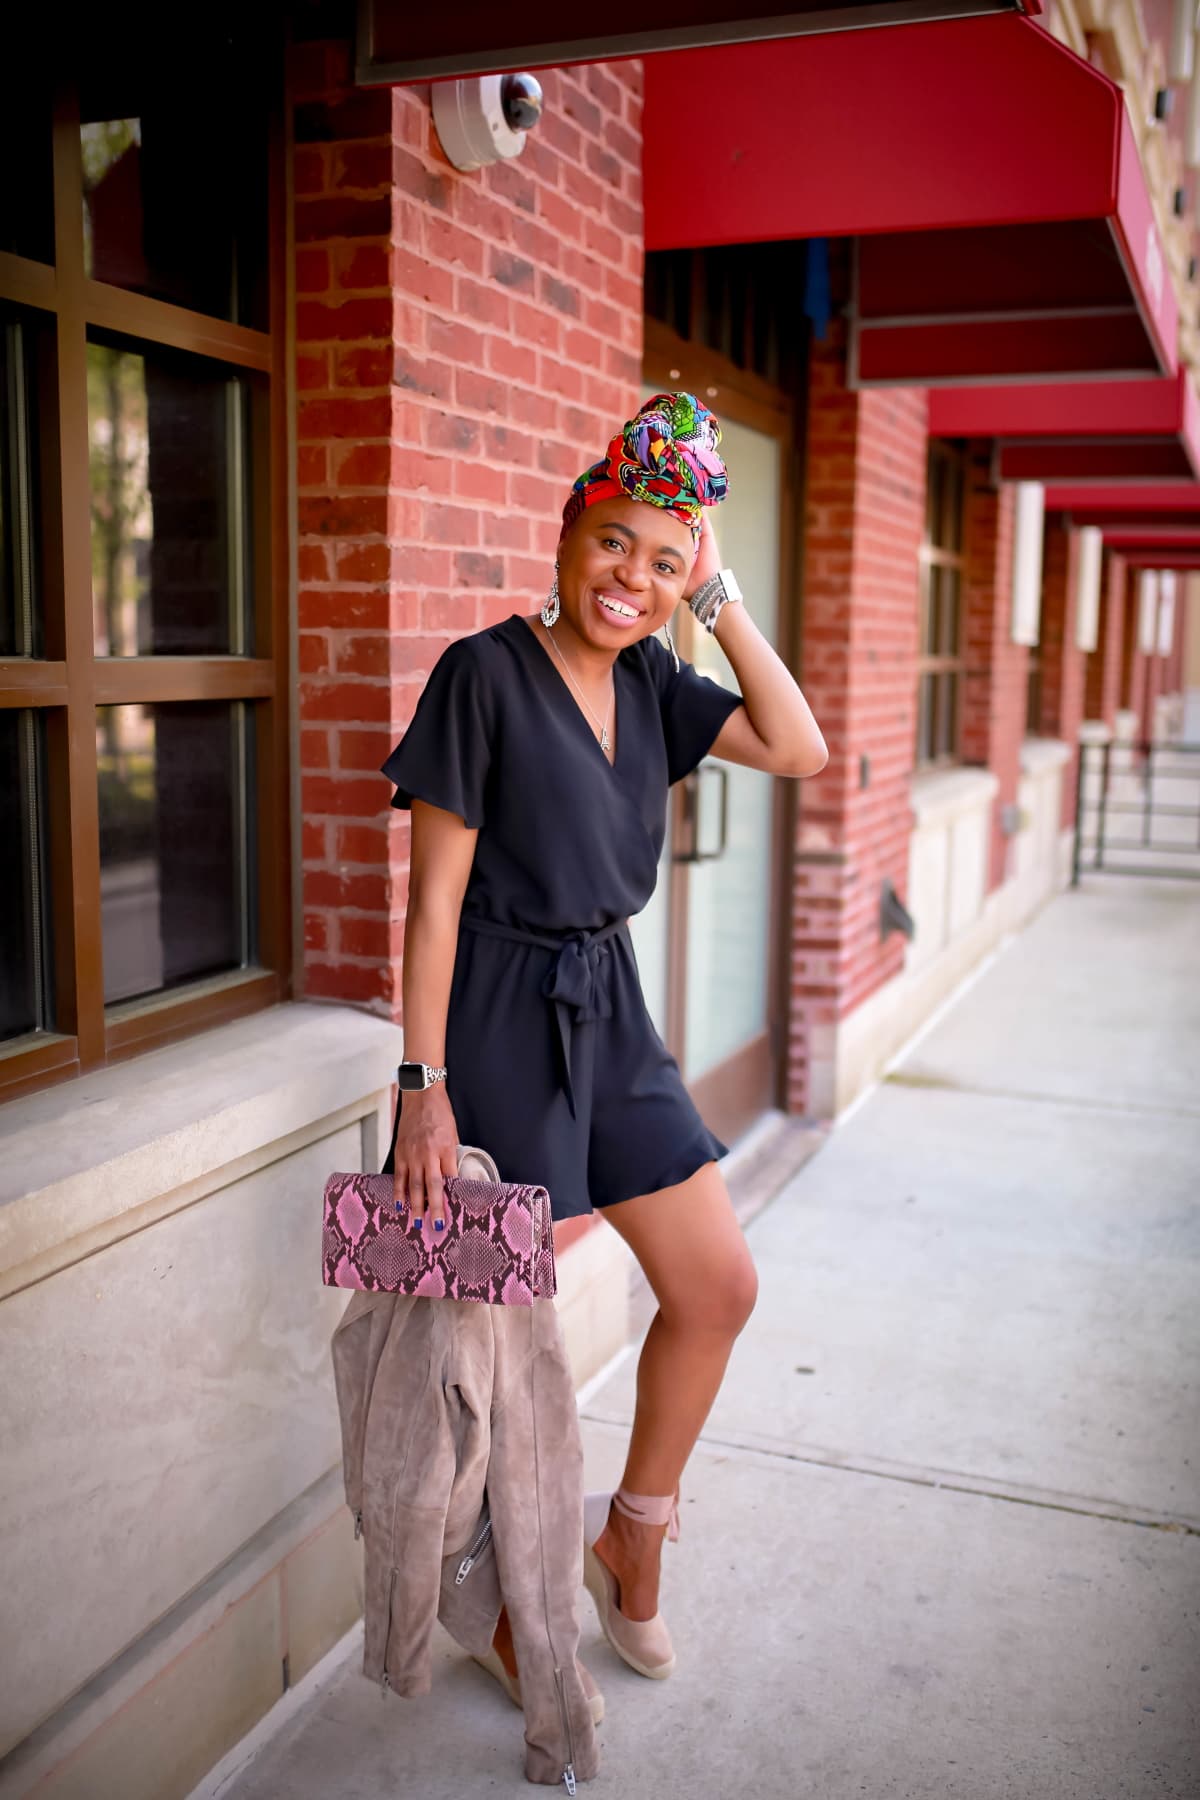 Fashion and style blogger, Louisa Moje shares three practical looks to wear this summer. IF you’ve always been at a loss on how to style a romper, read this post. Get three practical outfit ideas on how to style a black romper from work style, everyday casual, to date night look. #datenight #everydaystyle #casualstyle